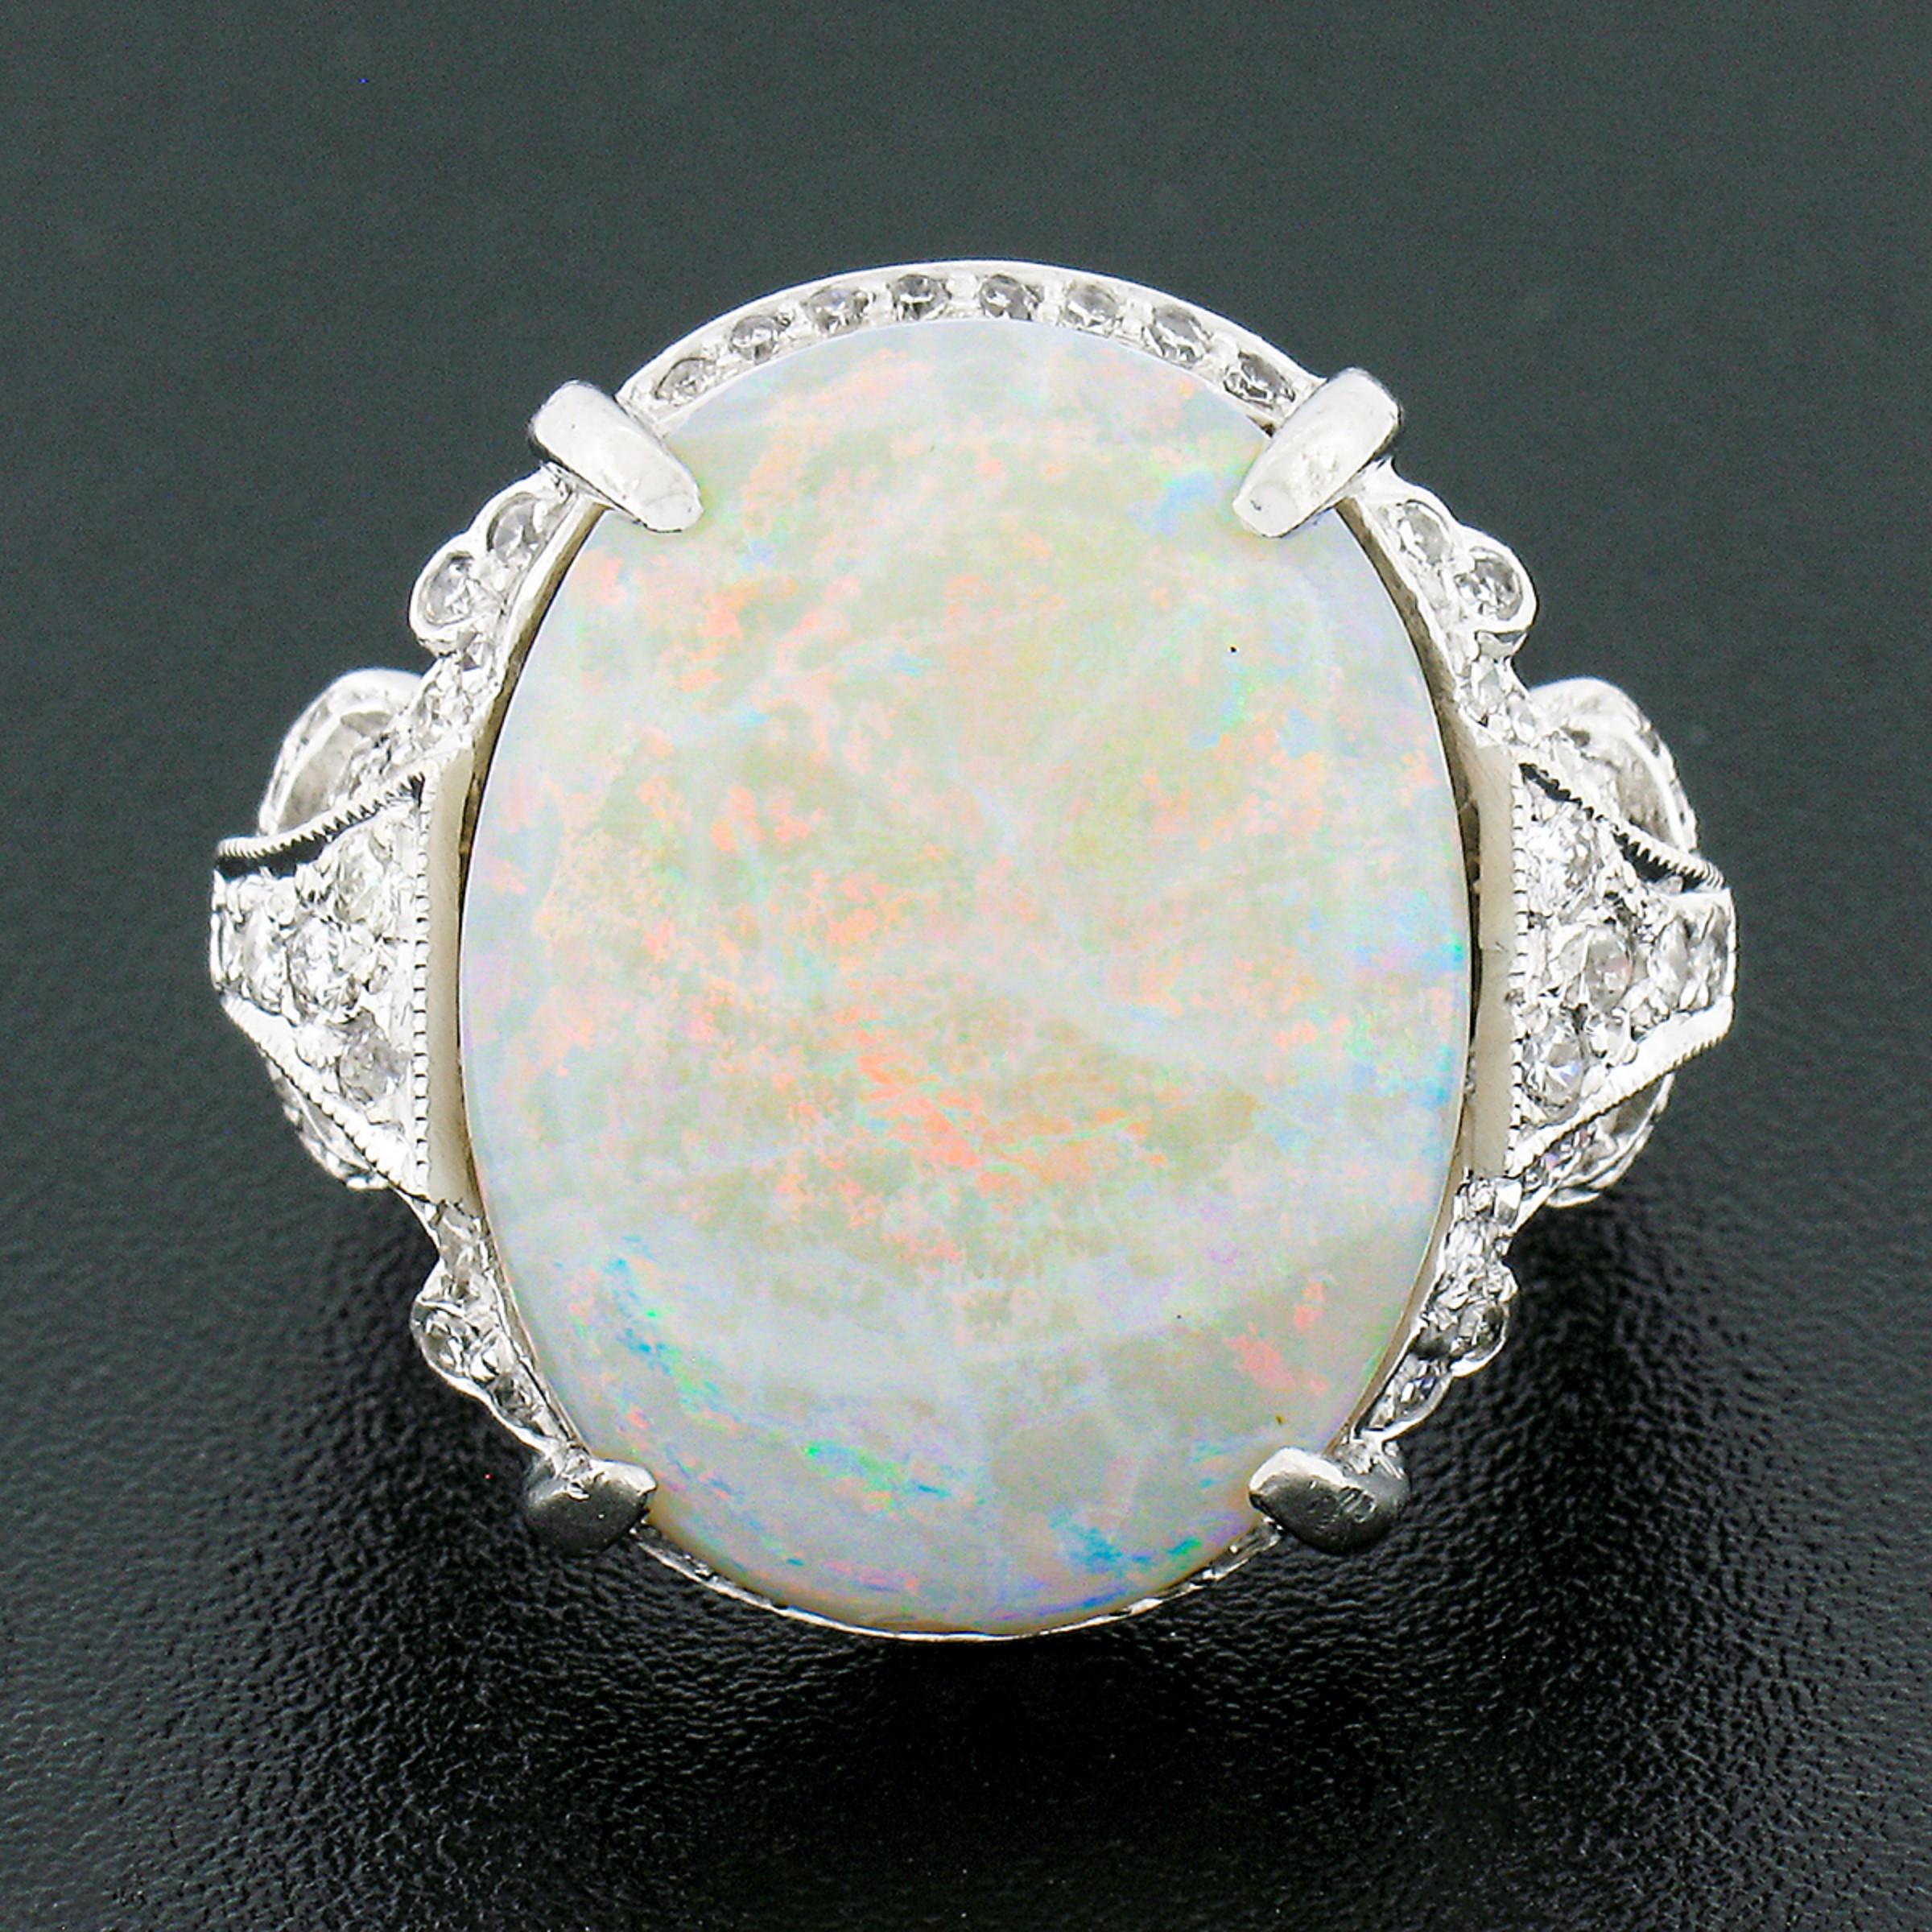 This stunning opal and diamond vintage cocktail ring is crafted in solid platinum and features an outstanding oval cabochon cut opal stone neatly prong set on an open basket at the center. This large stone has a beautiful white base color showing